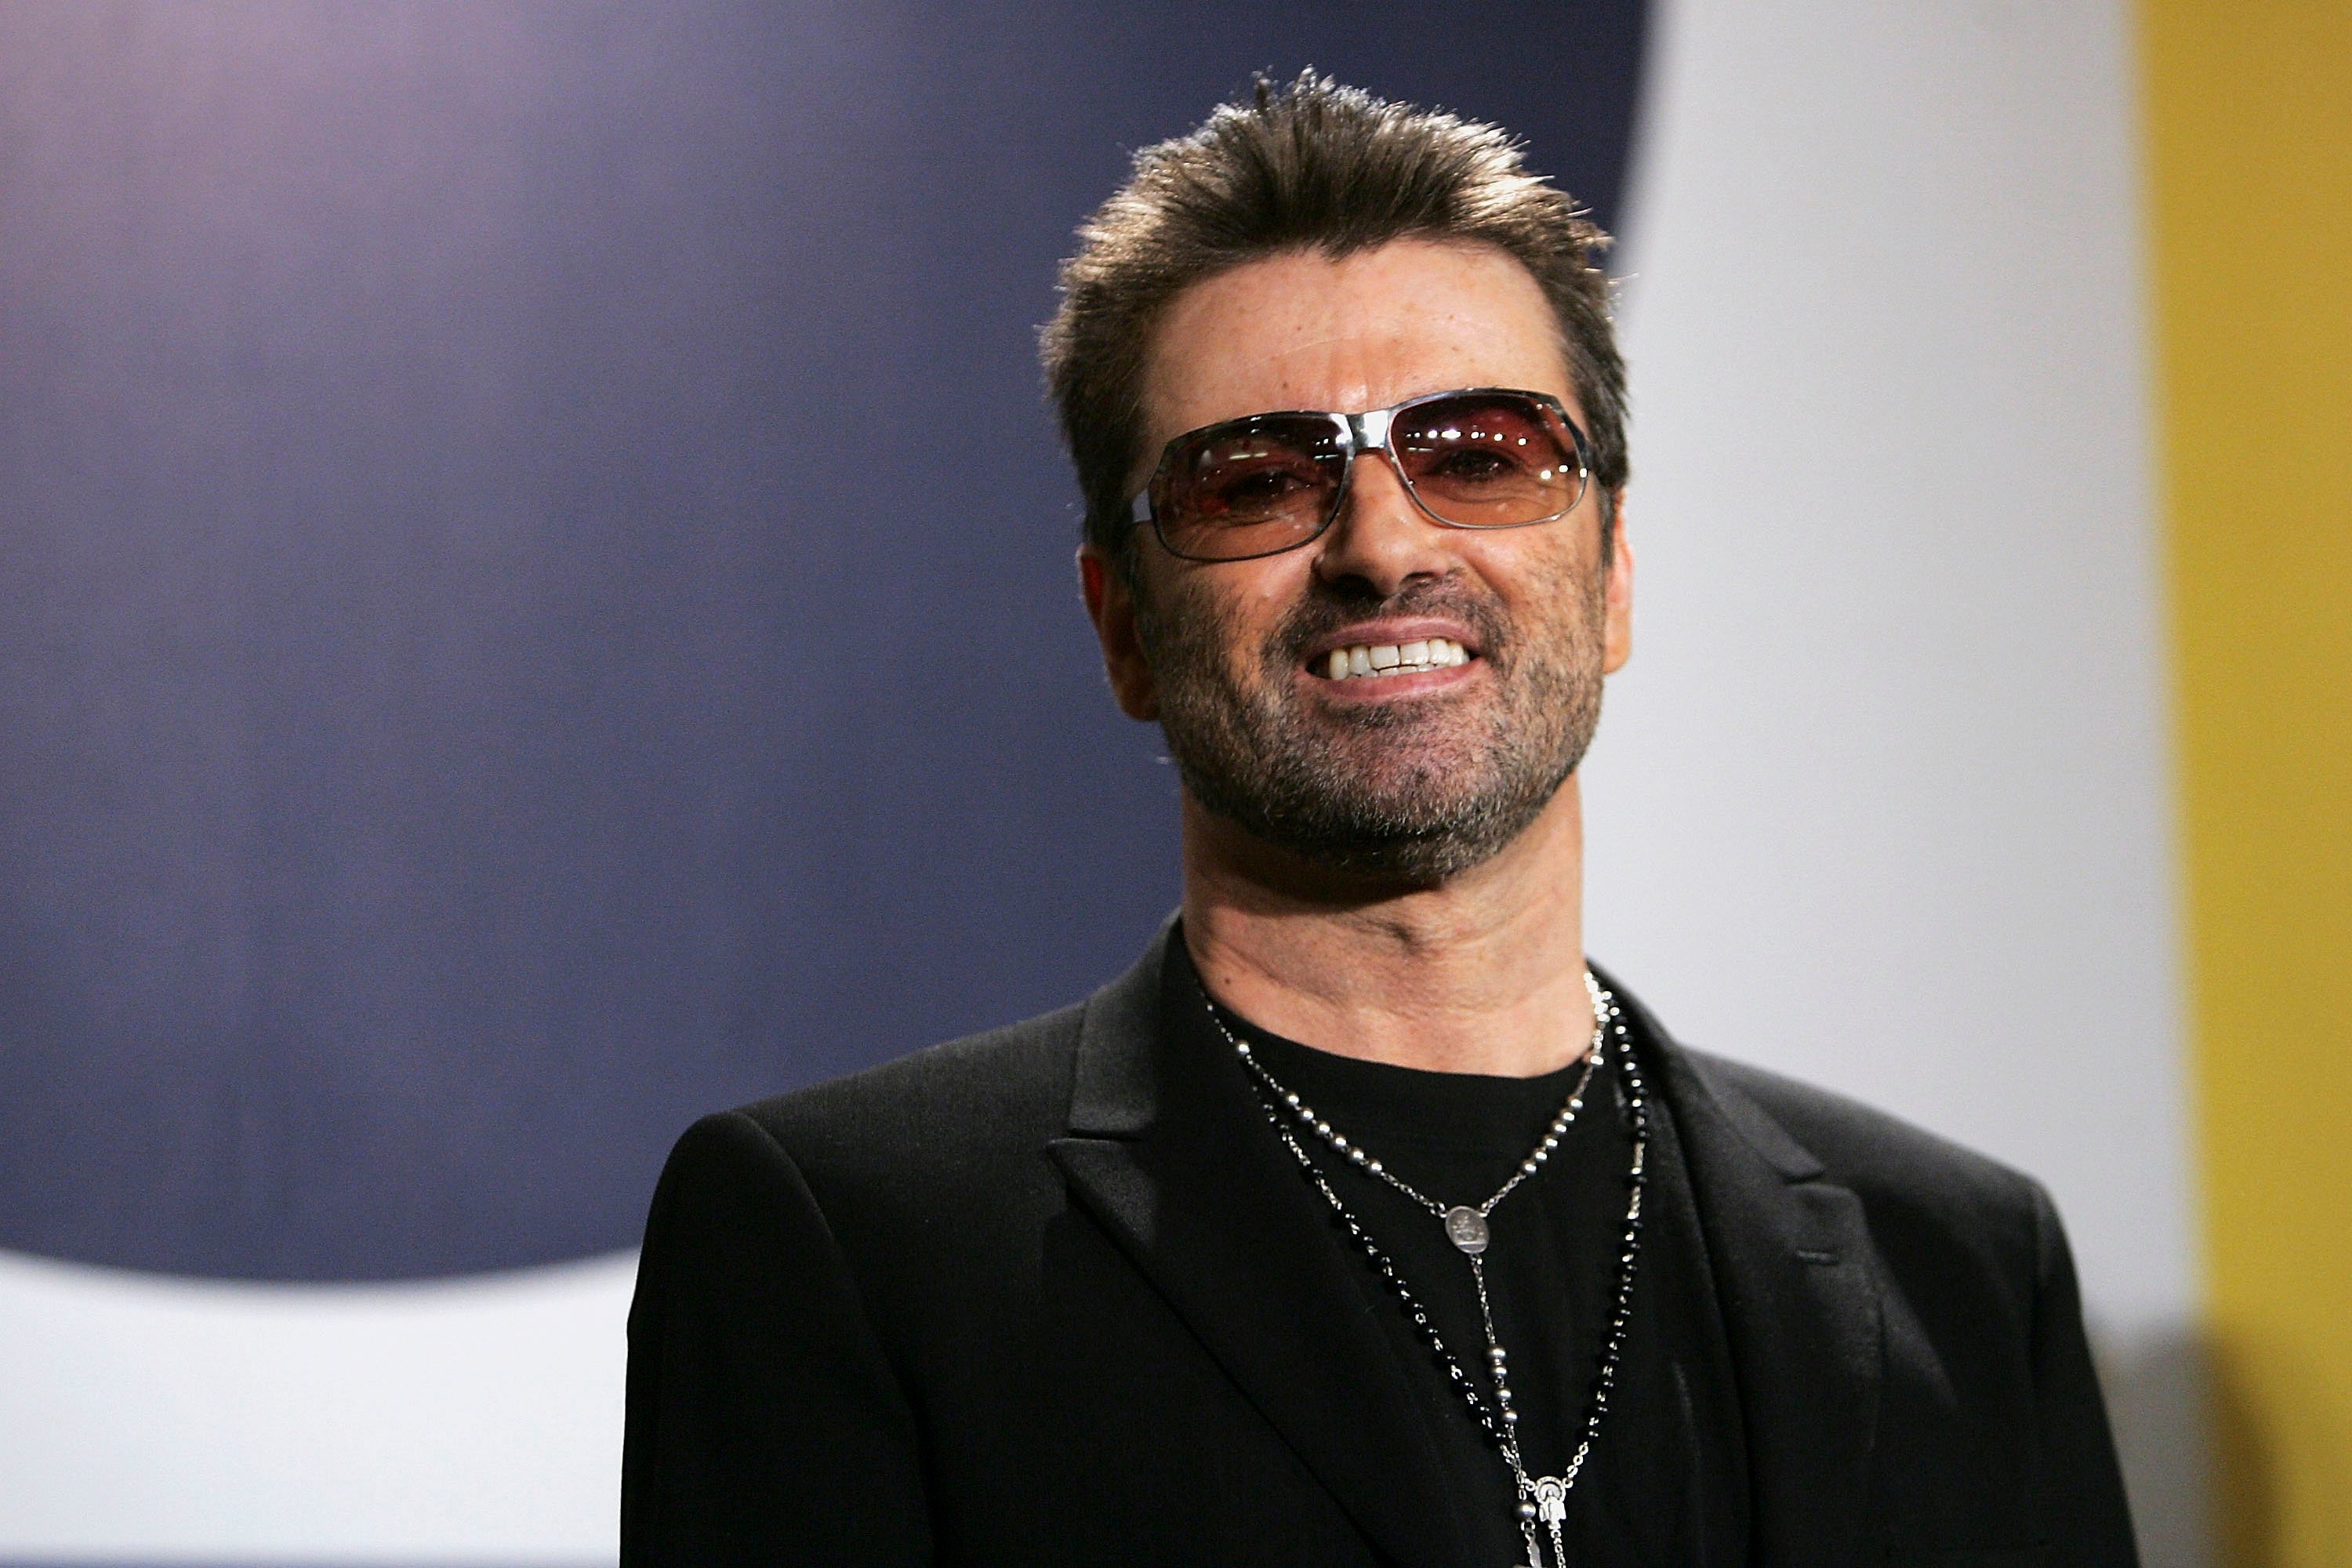 Singer George Michael poses at the 'George Michael: A Different Story' Photocall during the 55th annual Berlinale International Film Festival